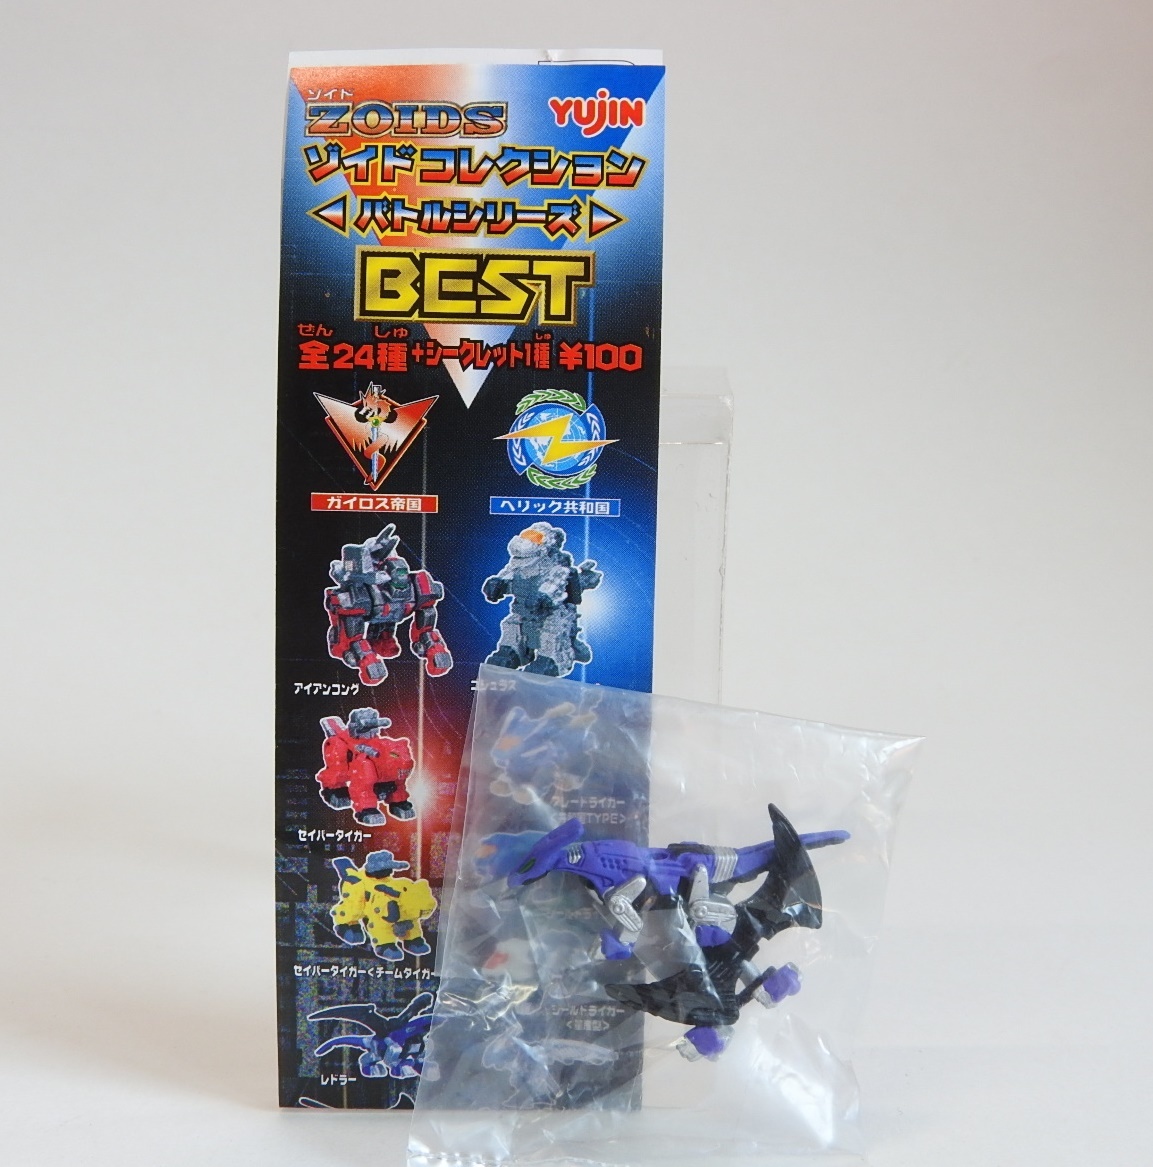 [ new goods unopened ] Zoids collection Battle series BEST the best re gong - Zoids Tommy 